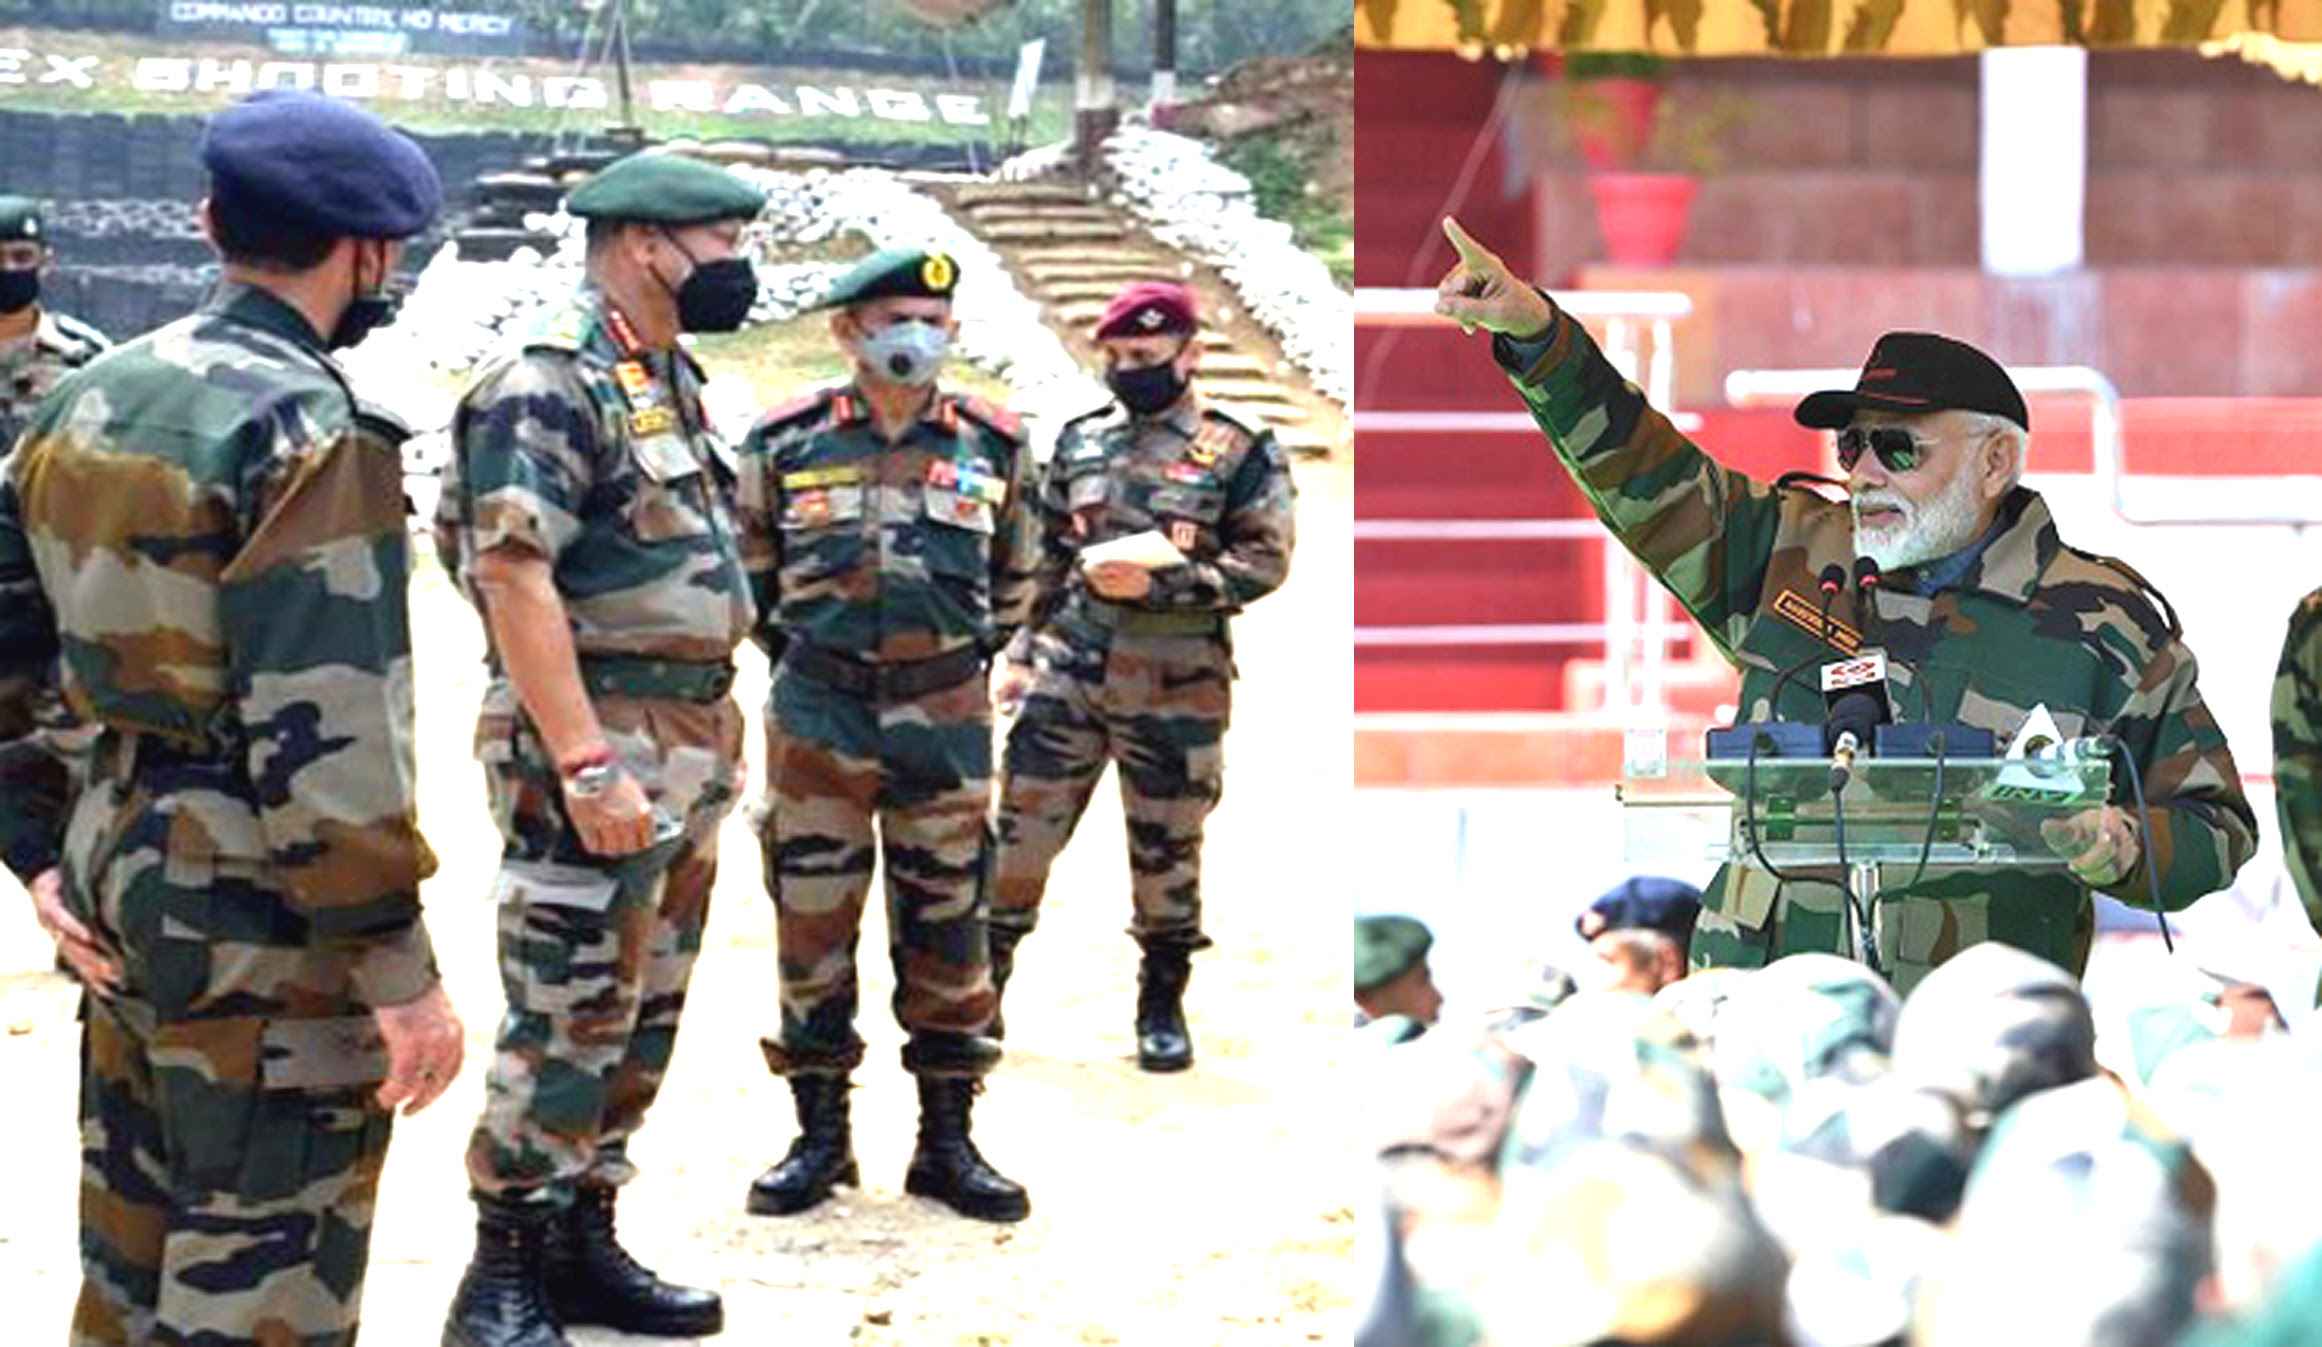 Indian Army gets a new combat uniform with better camouflage